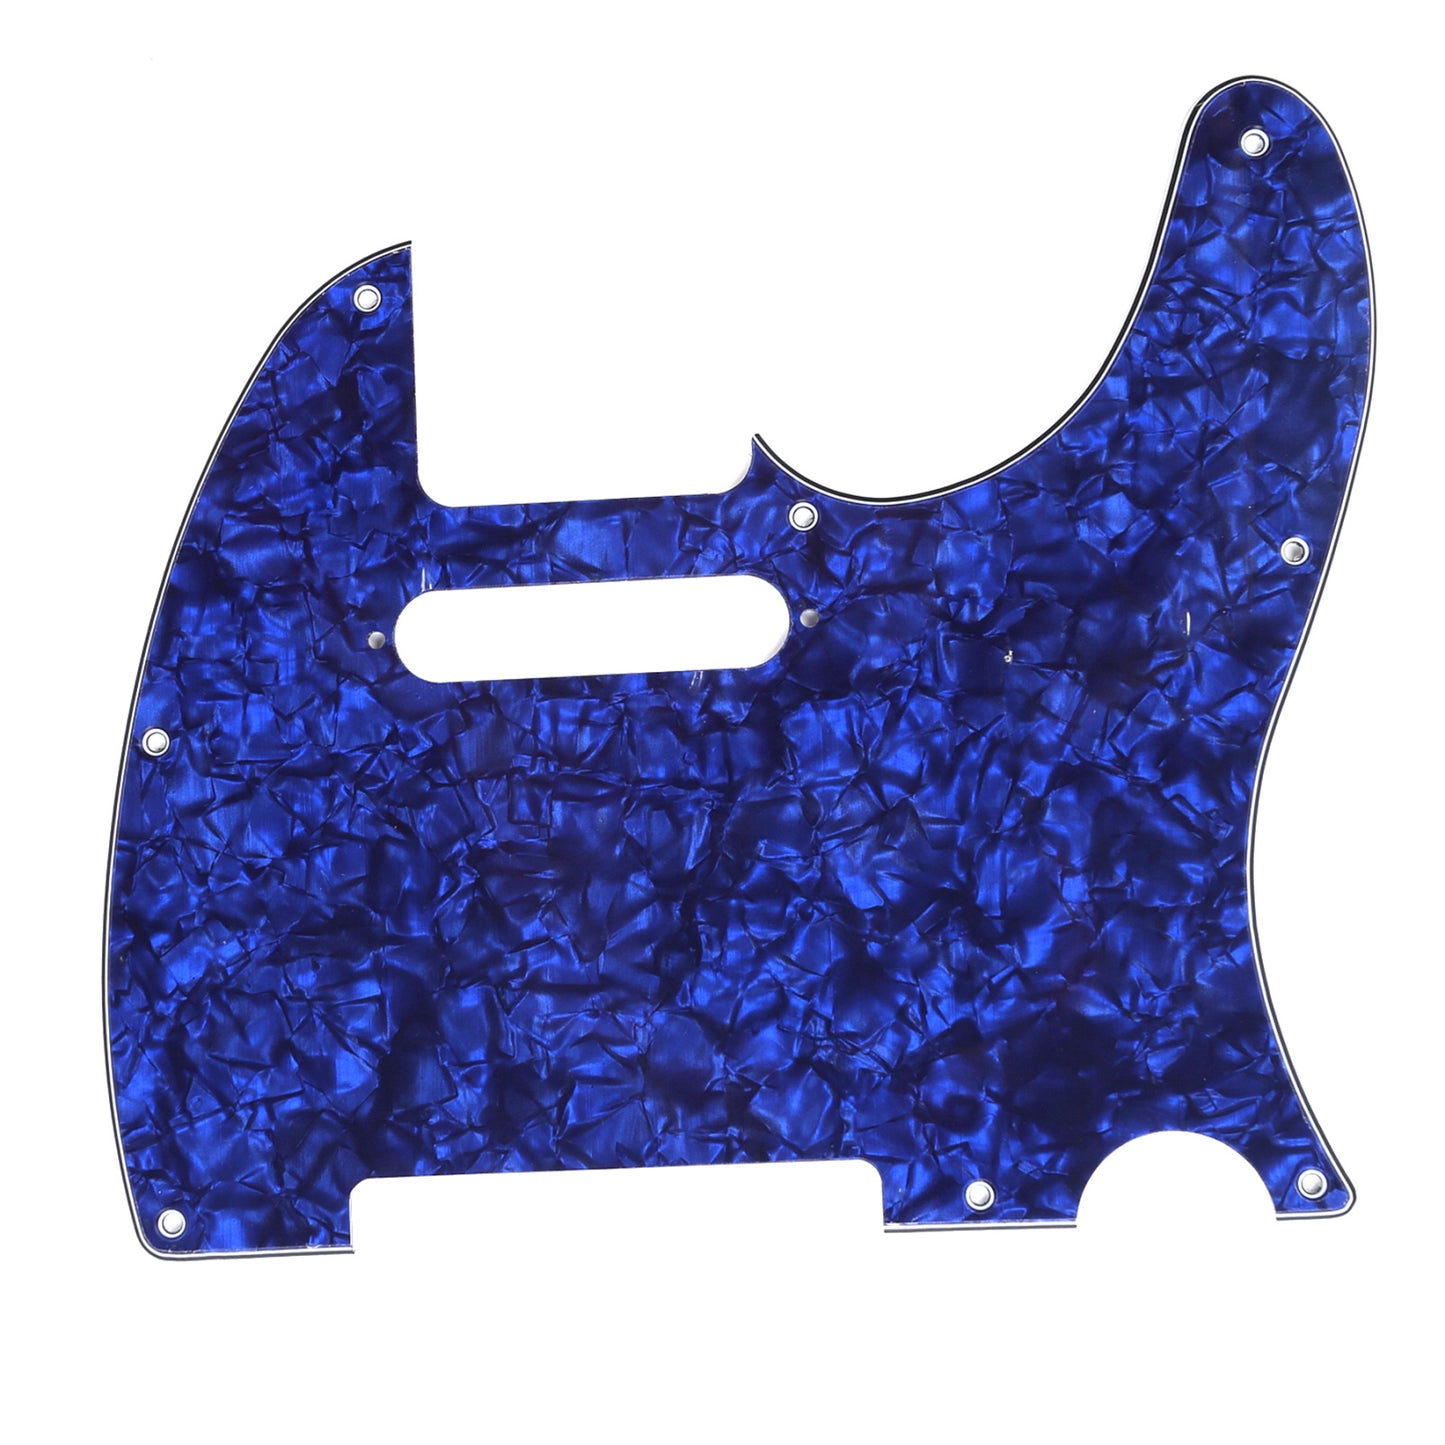 Musiclily 8 Hole Tele Guitar Pickguard for USA/Mexican Made Fender Standard Telecaster Modern Style , 4Ply Blue Pearl